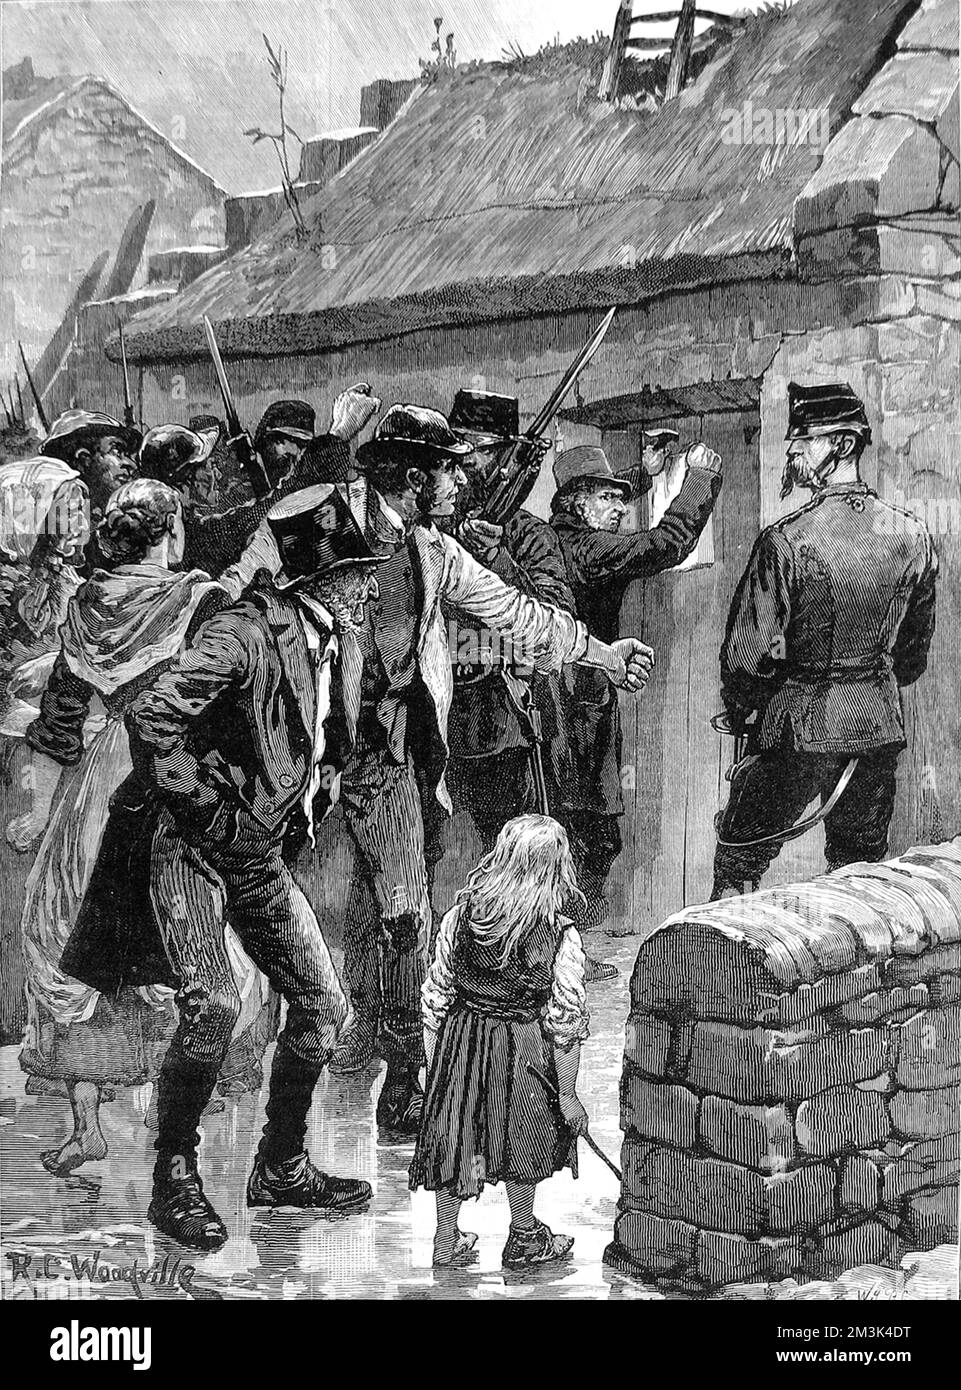 A crowd outside a dwelling where an eviction notice is being served. The presence of armed enforcers and the gentleman banging on the door with a mallet or hammer makes the scene very tense and menacing. It is possible that the tenants will be forcibly evicted within minutes. Evictions of peasants was widespread in 19th century Ireland against the backdrop of the potatoe famine and lack of other means of employment - as peasants fell behind with their rent. Stock Photo